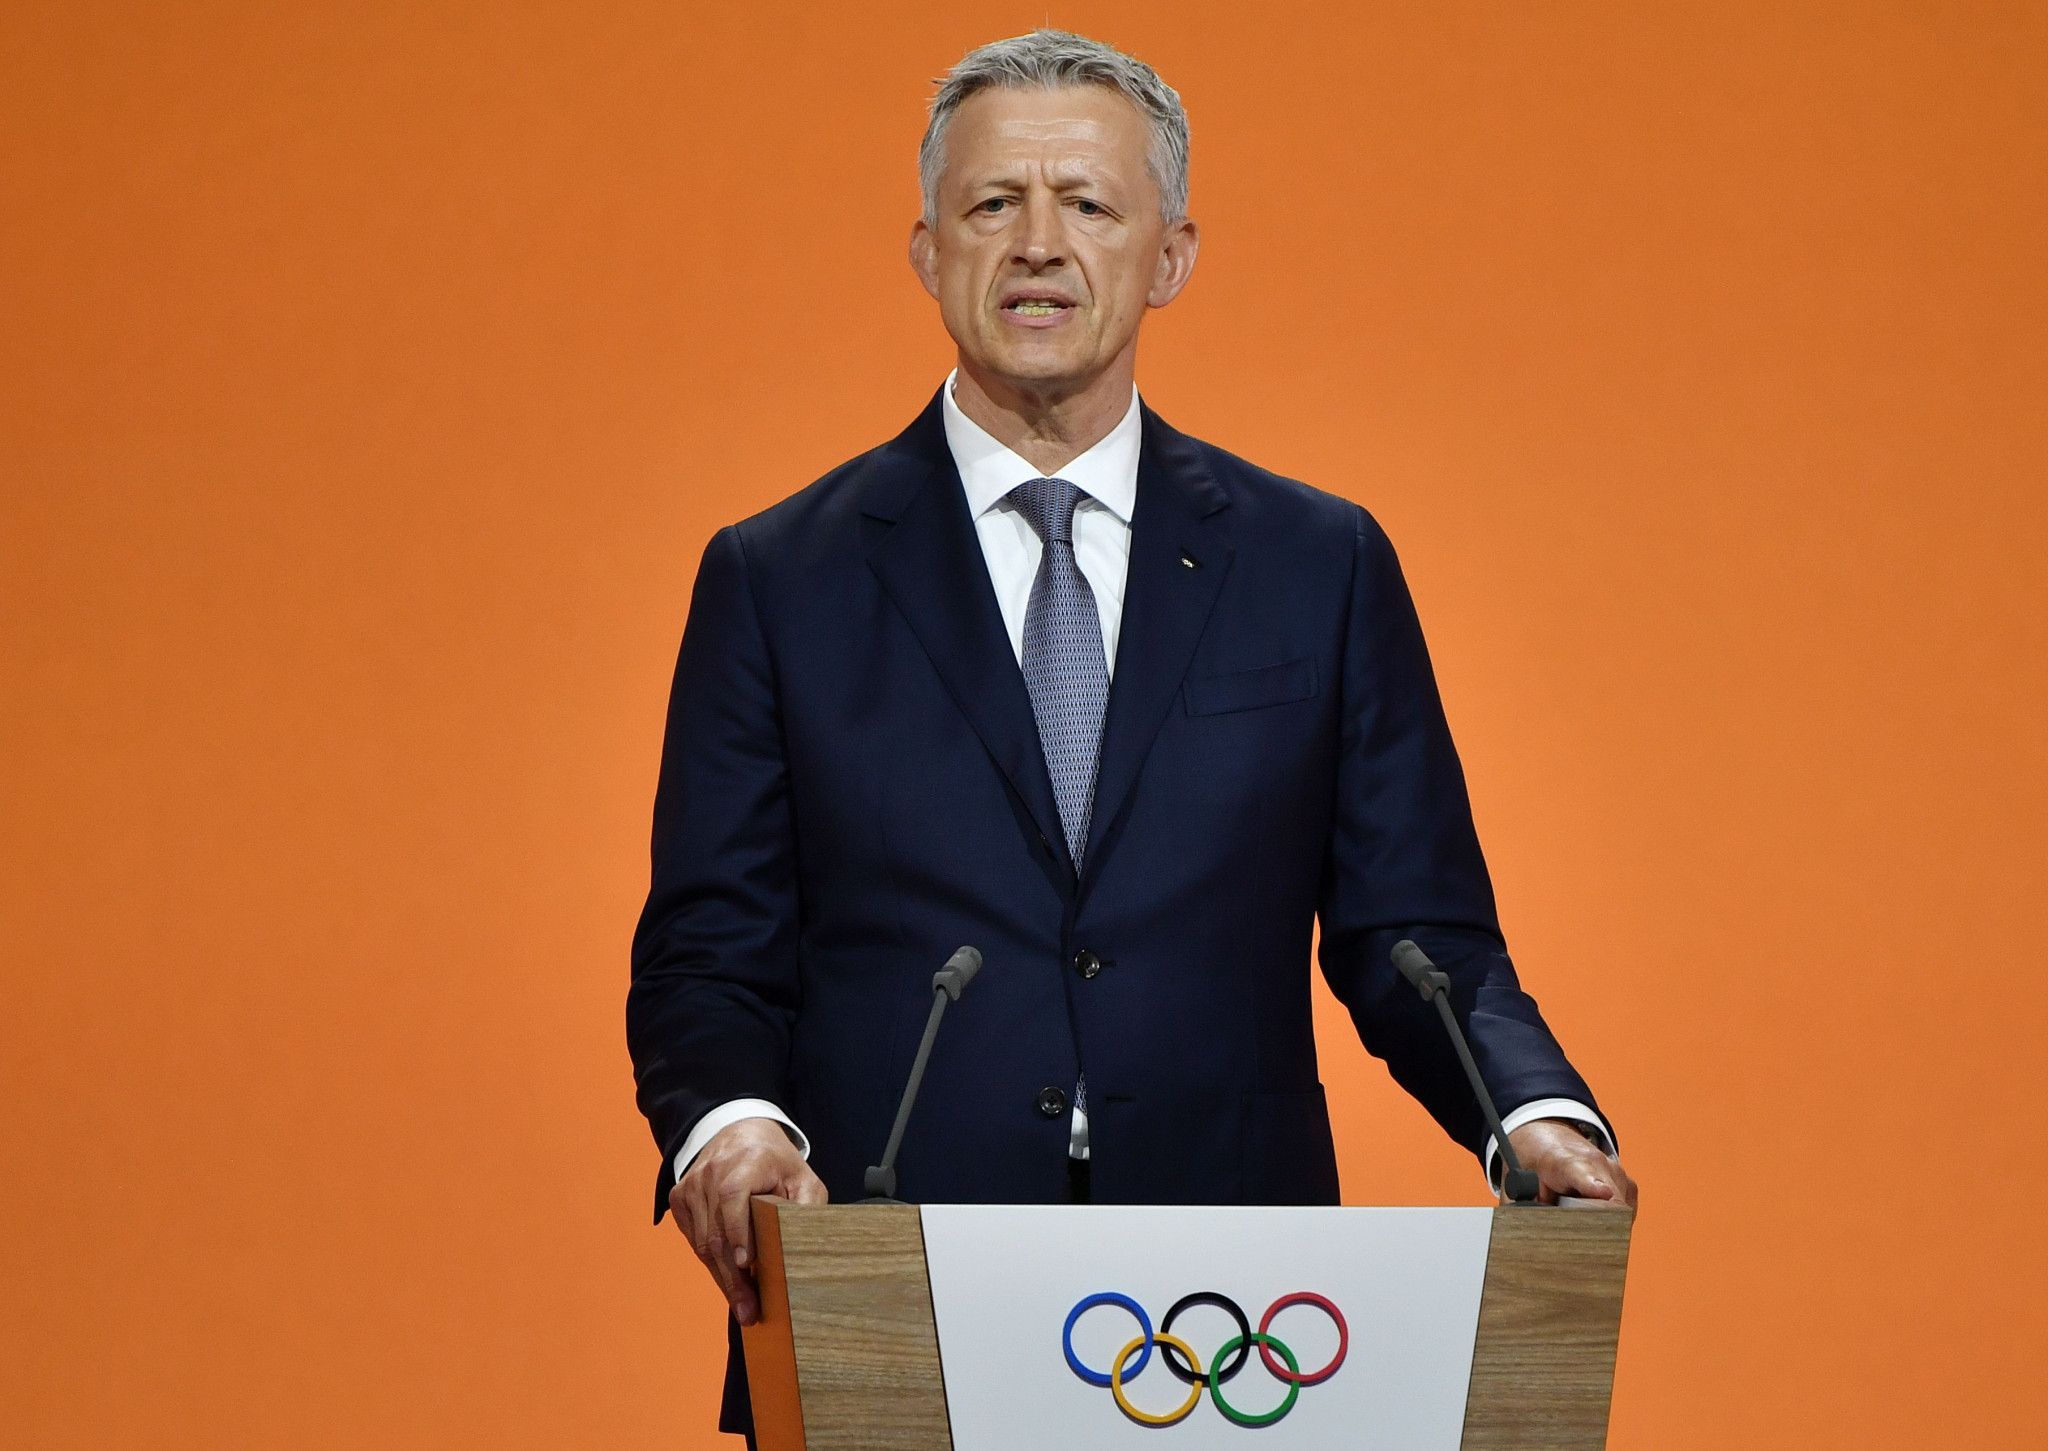 Octavian Morariu chairs the Future Host Commission for the Olympic Winter Games ©Getty Images